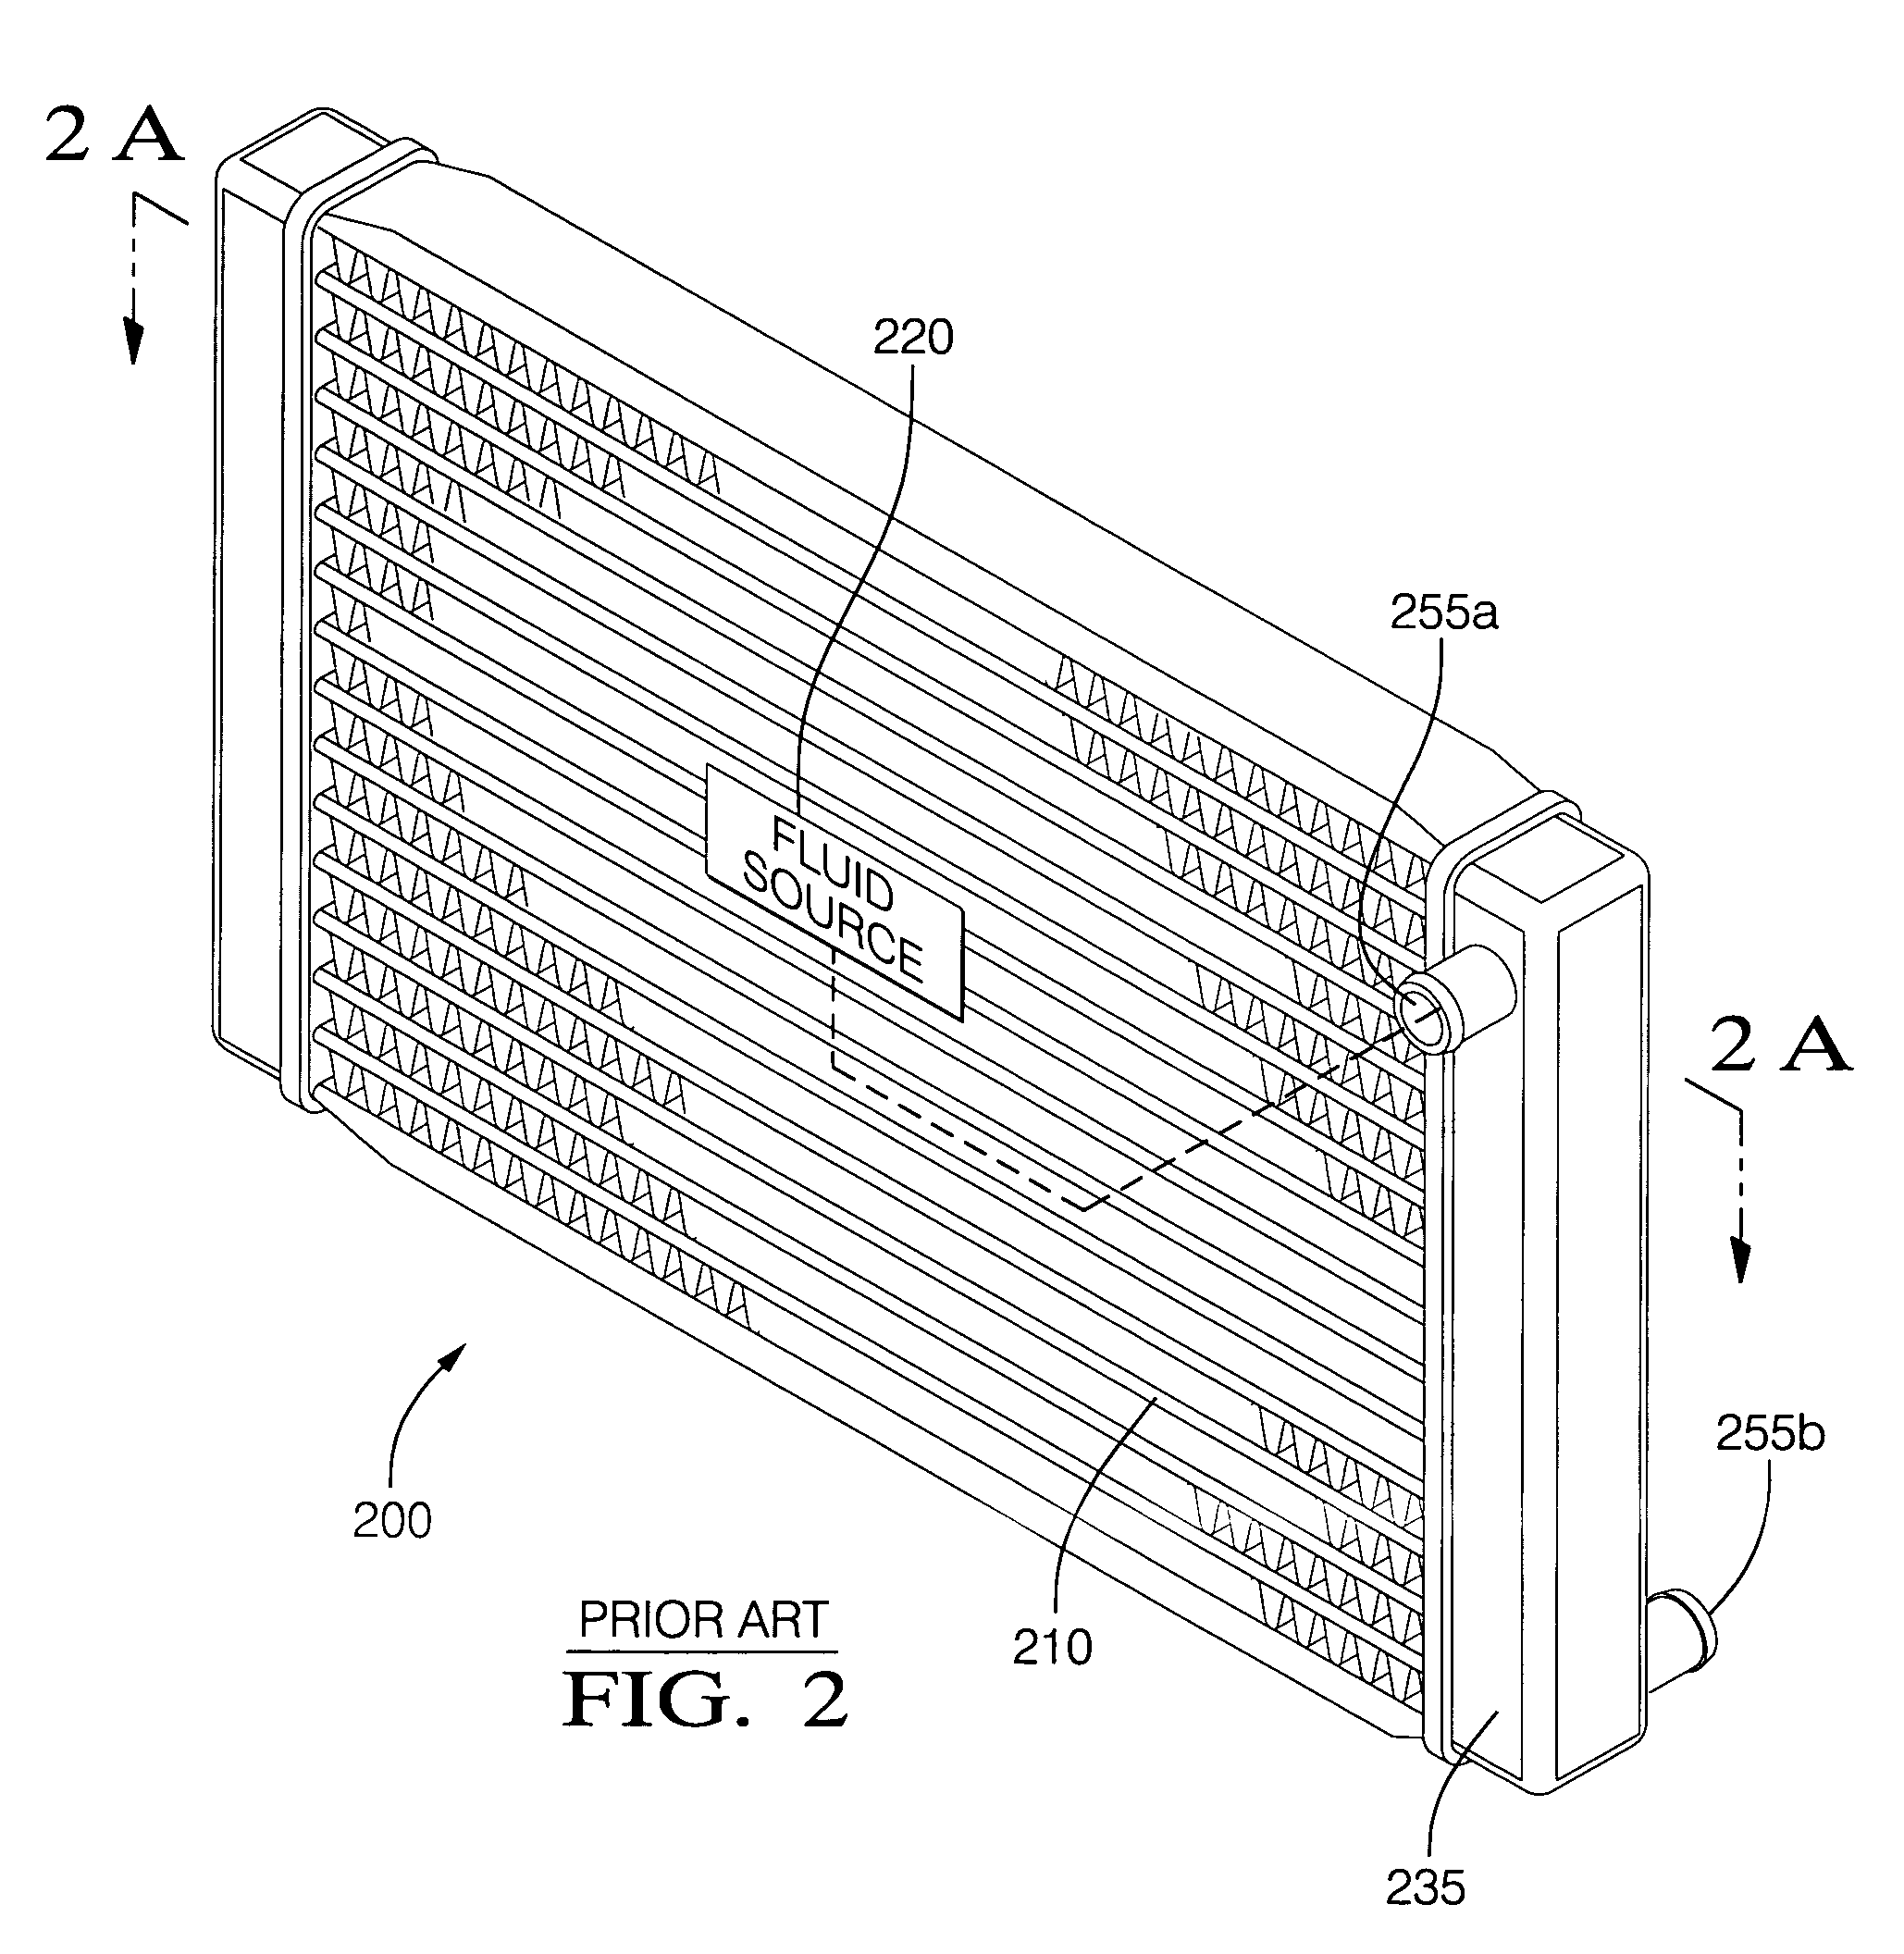 Contra-tapered tank design for cross-counterflow radiator